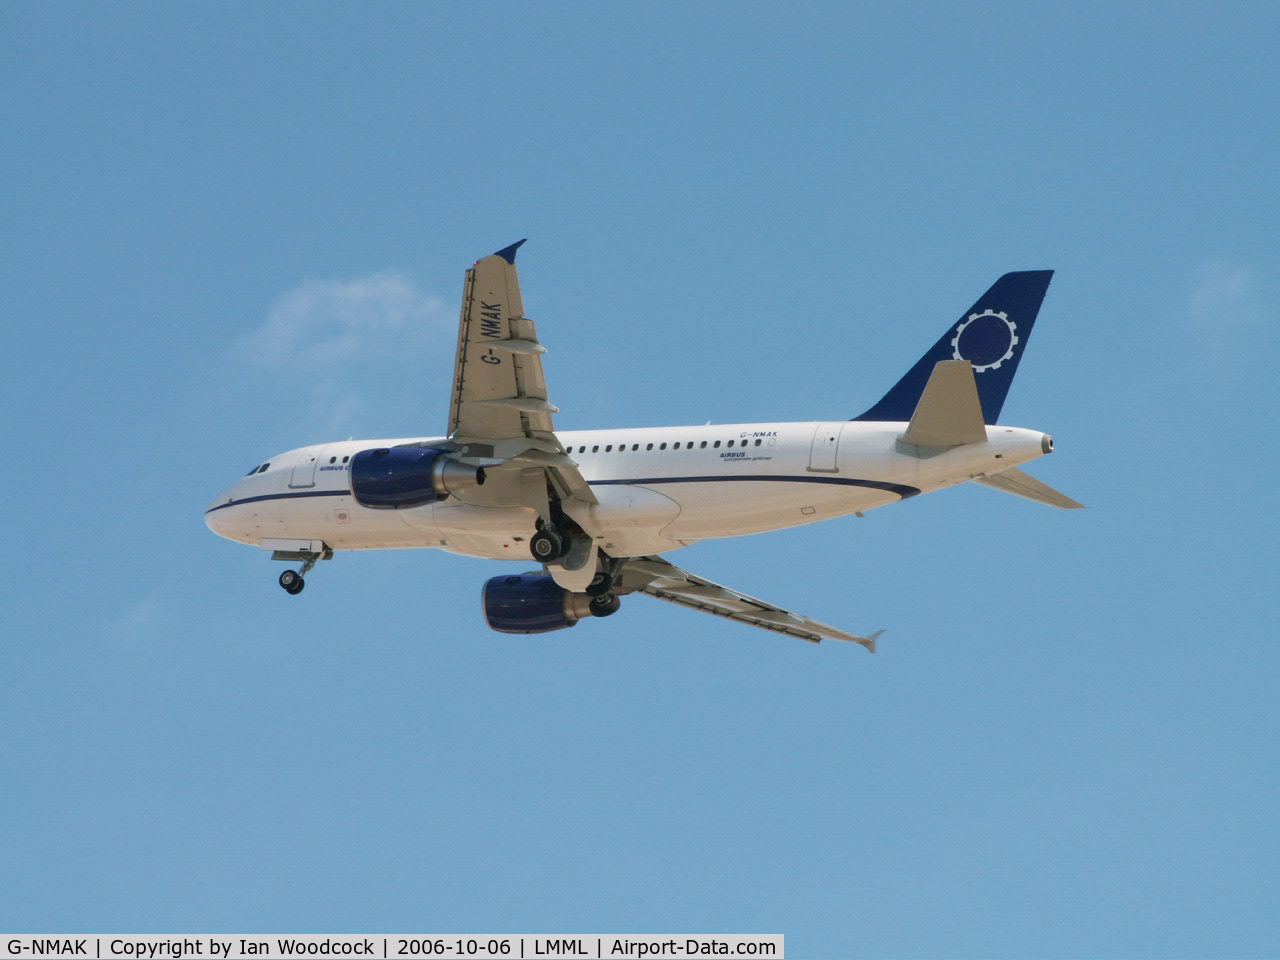 G-NMAK, 2005 Airbus A319-115 C/N 2550, Airbus A3119-115/Operated by Twinjet Aircraft/Luqa,Malta